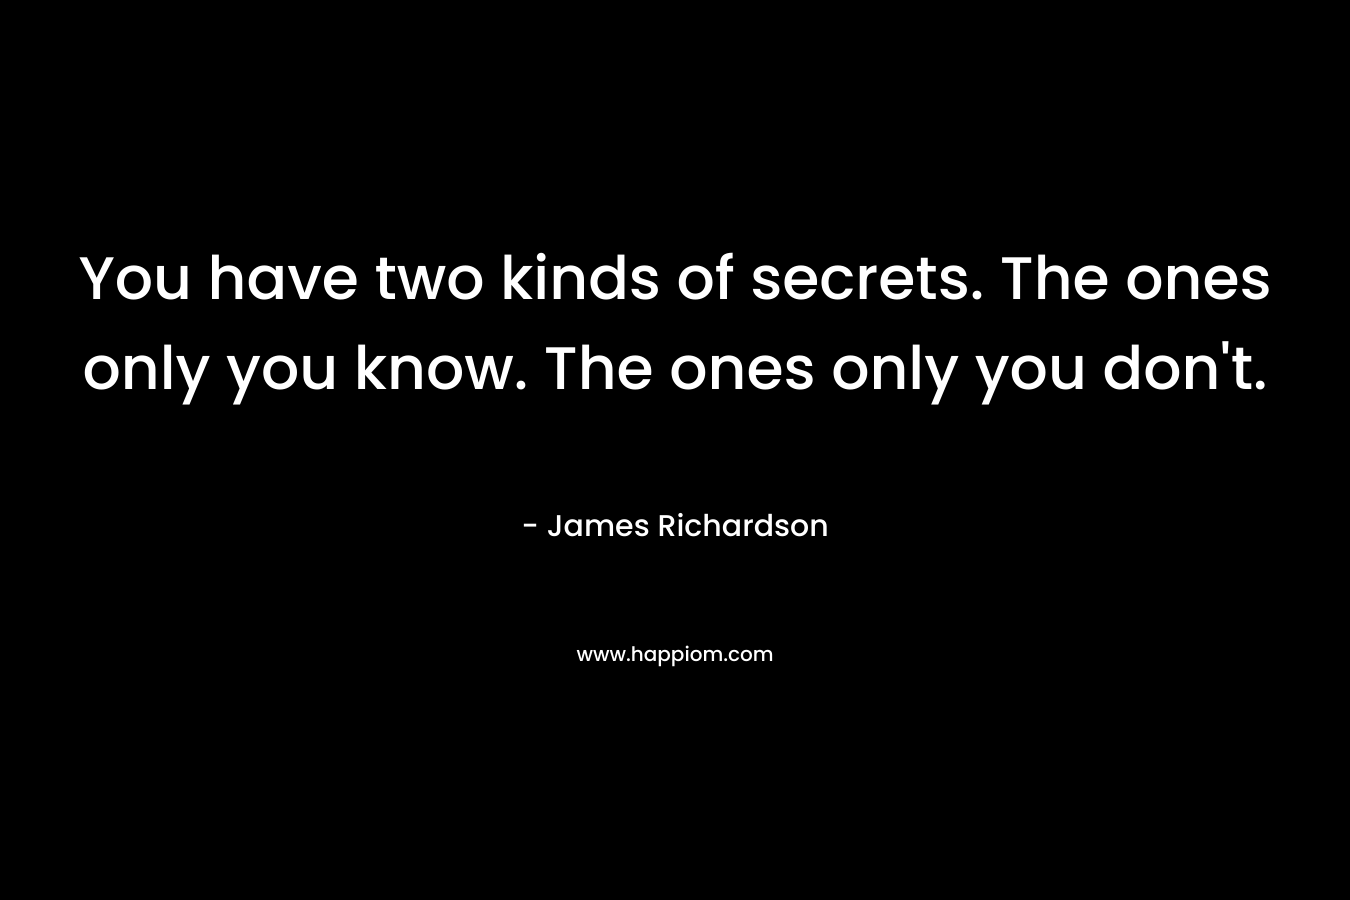 You have two kinds of secrets. The ones only you know. The ones only you don't.